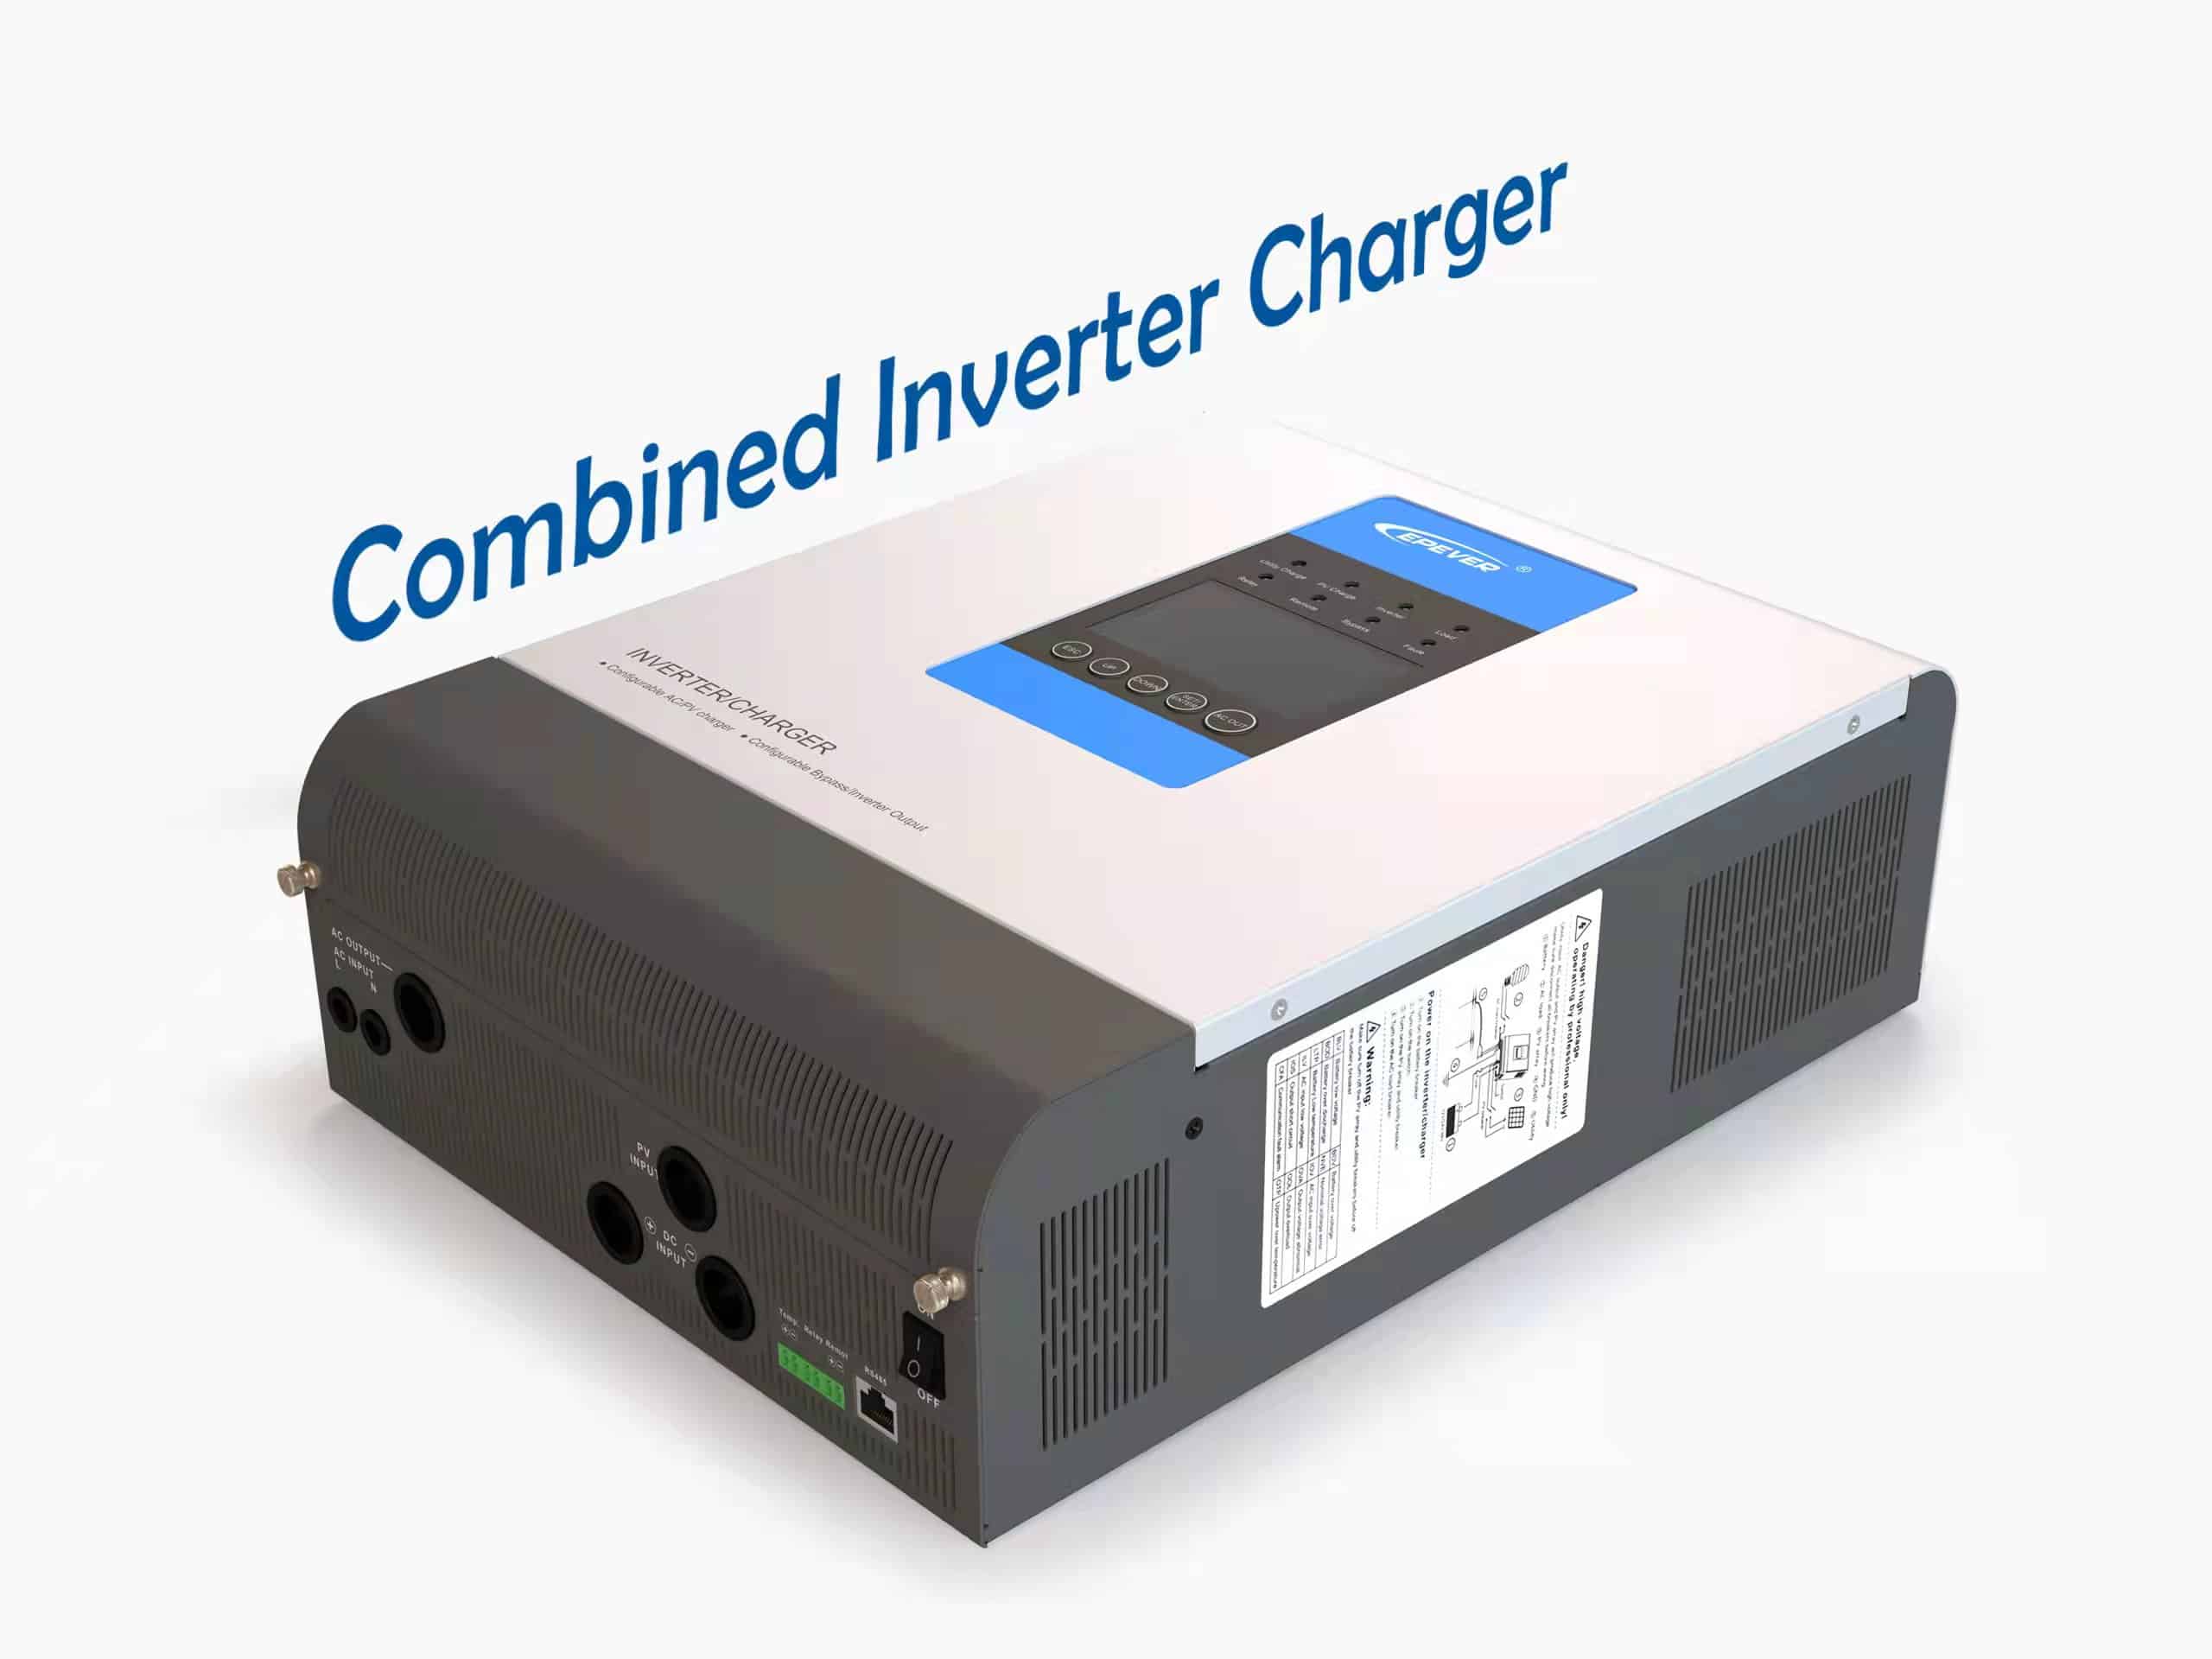 Combined Inverter Charger Combi to AC, to DC -